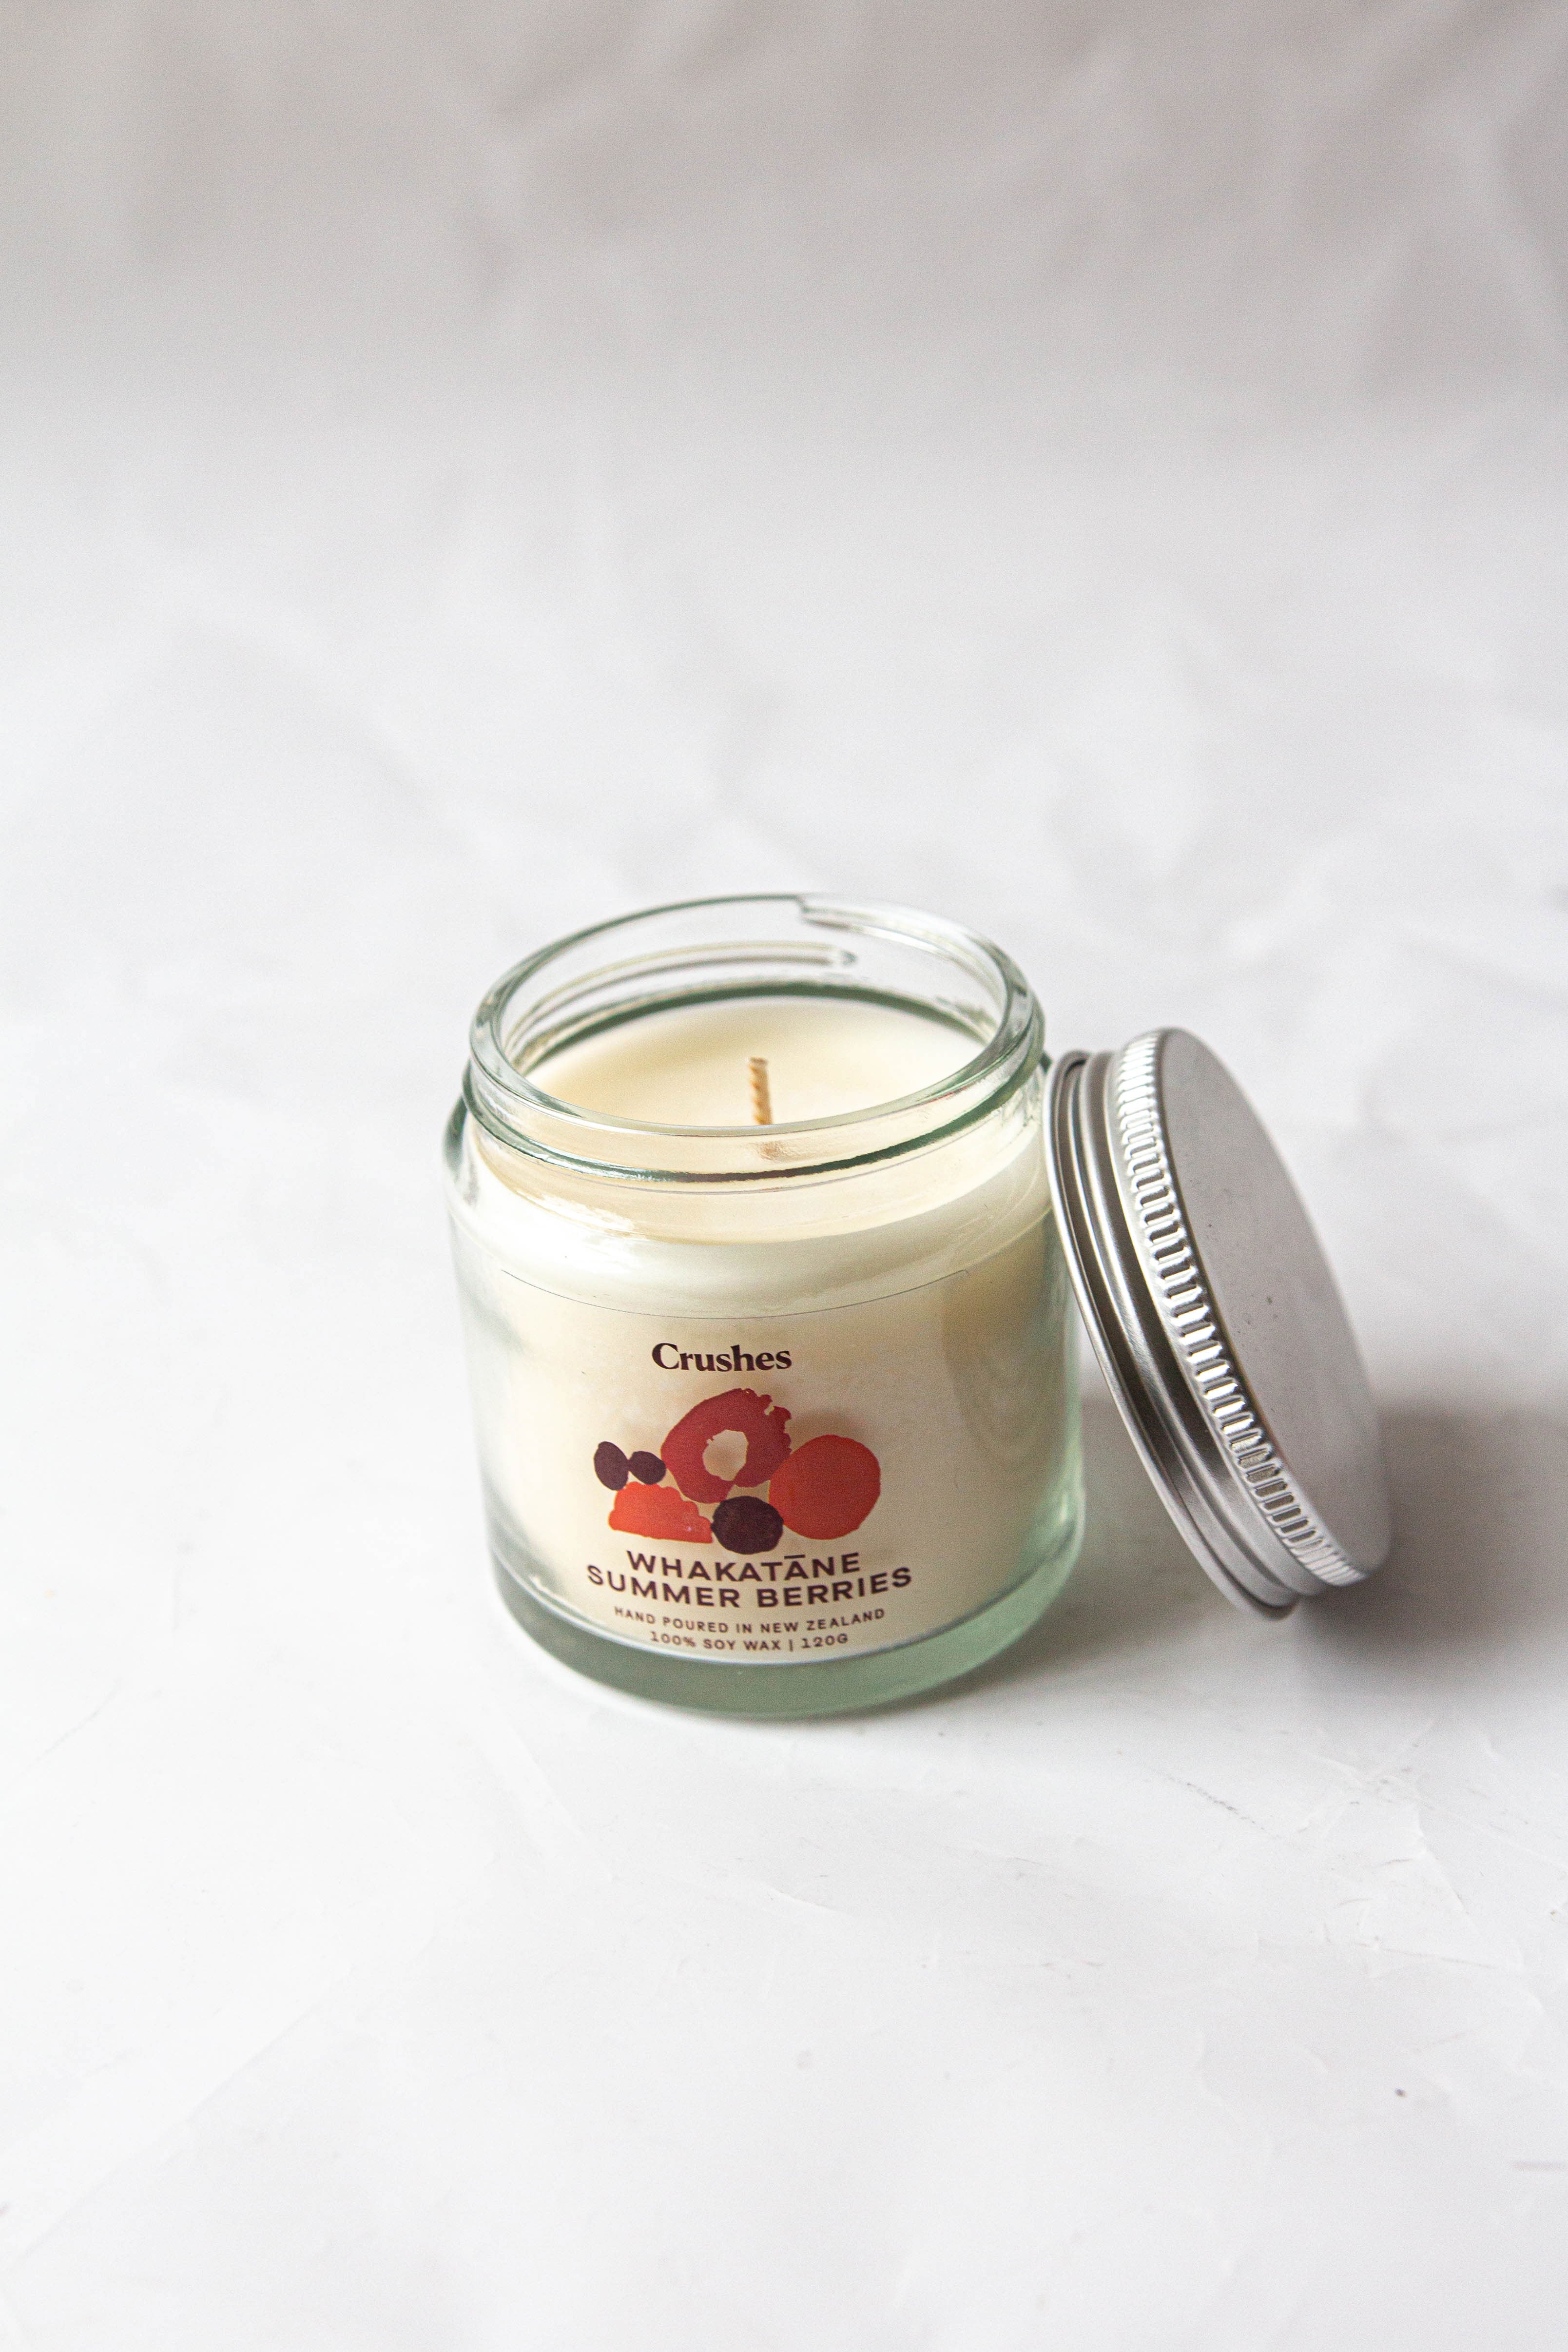 Whakatāne Summer Berries Scented Soy Candle